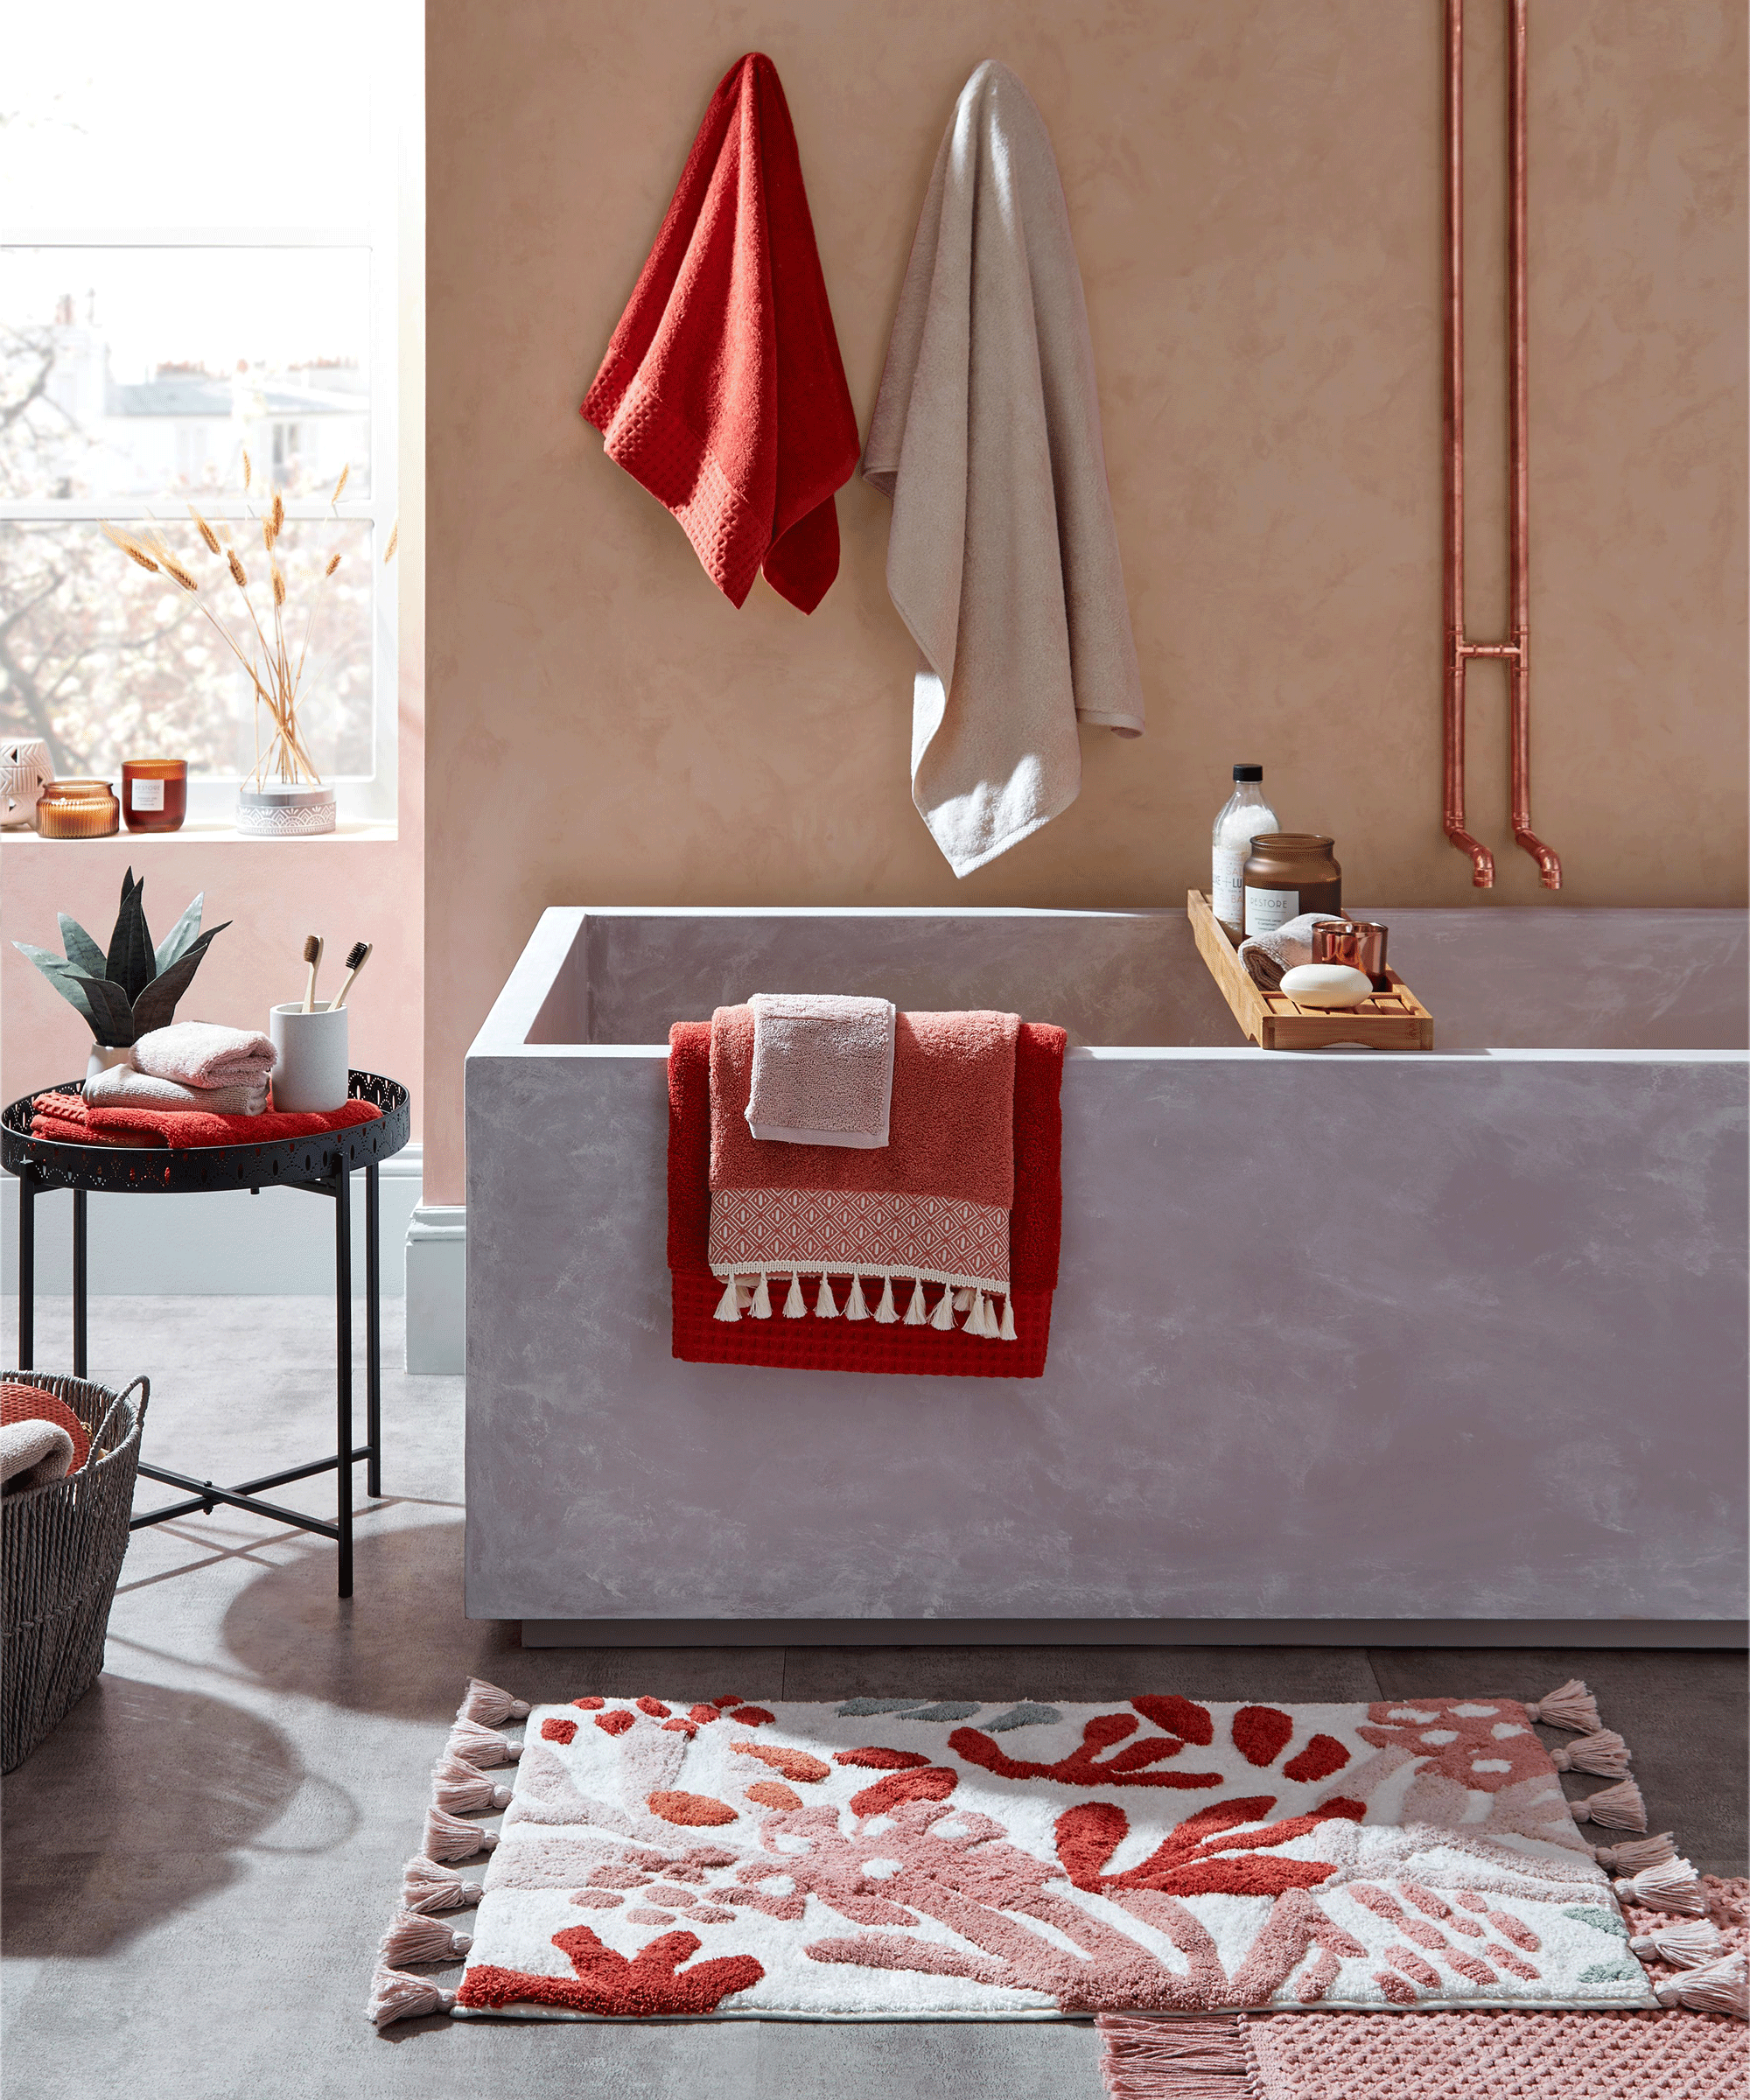 Bohemian bathroom with concrete bath and red/cream soft furnishings